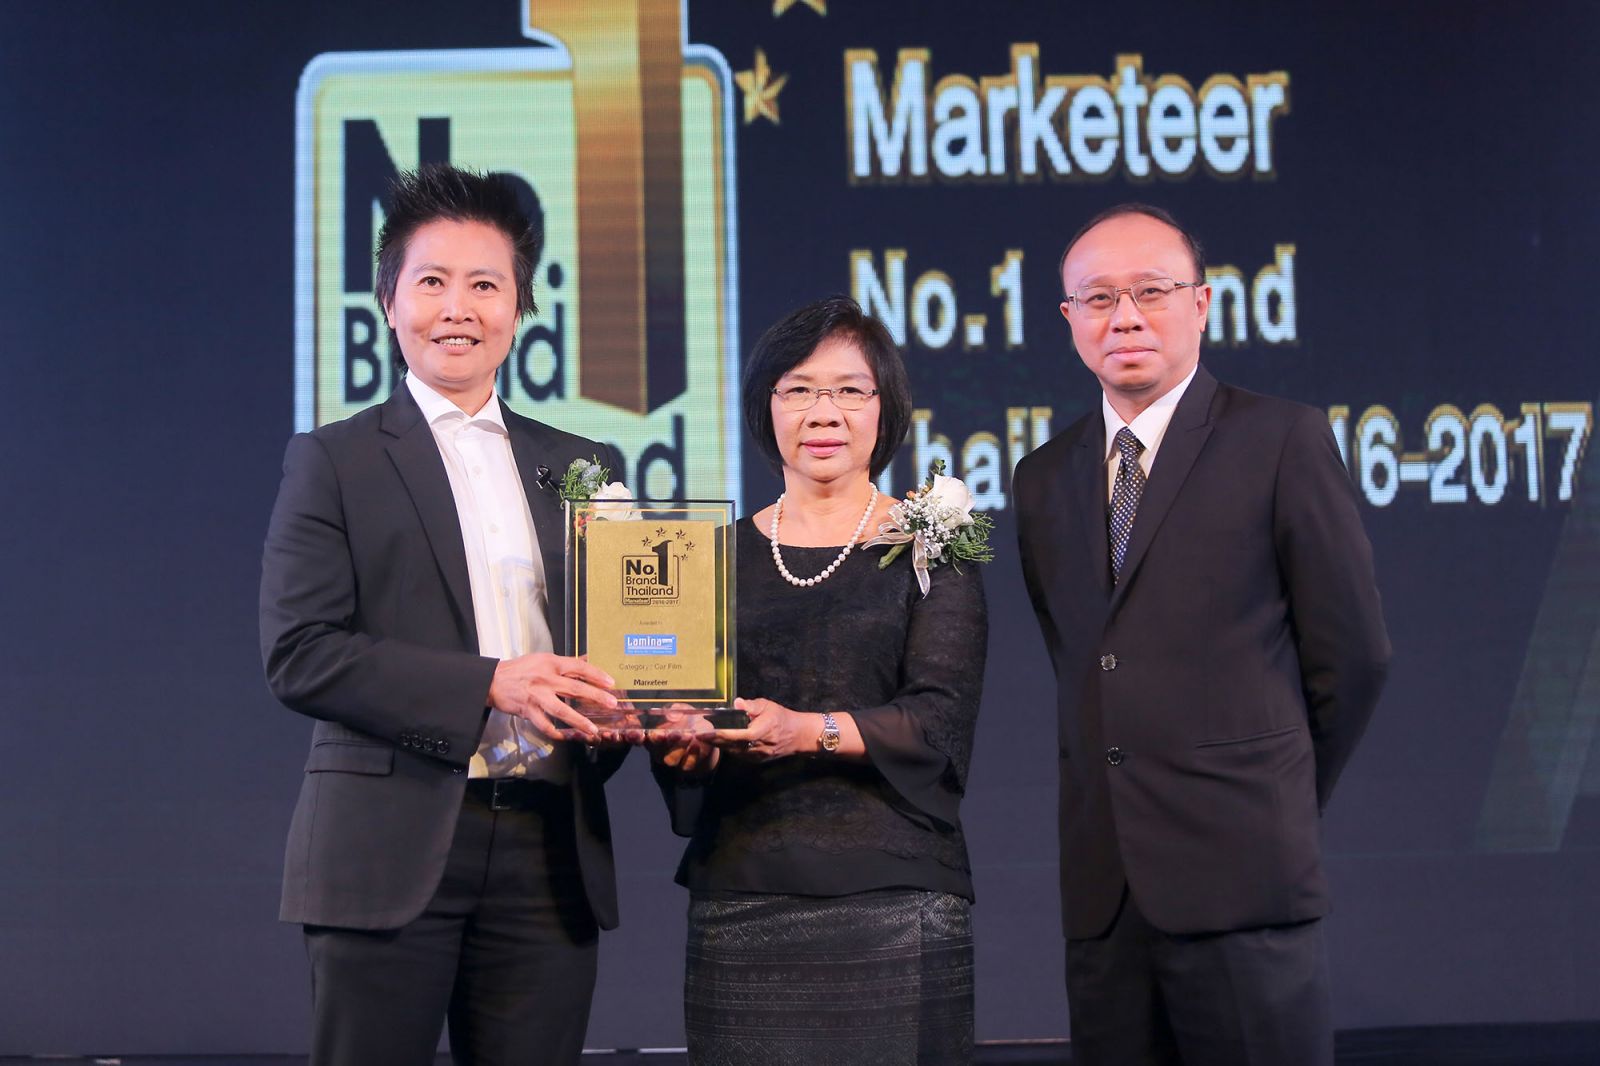 Lamina continues to win the hearts of consumers, winning the Marketeer No.1 Brand Thailand 2016-2017 award from real users’ survey.